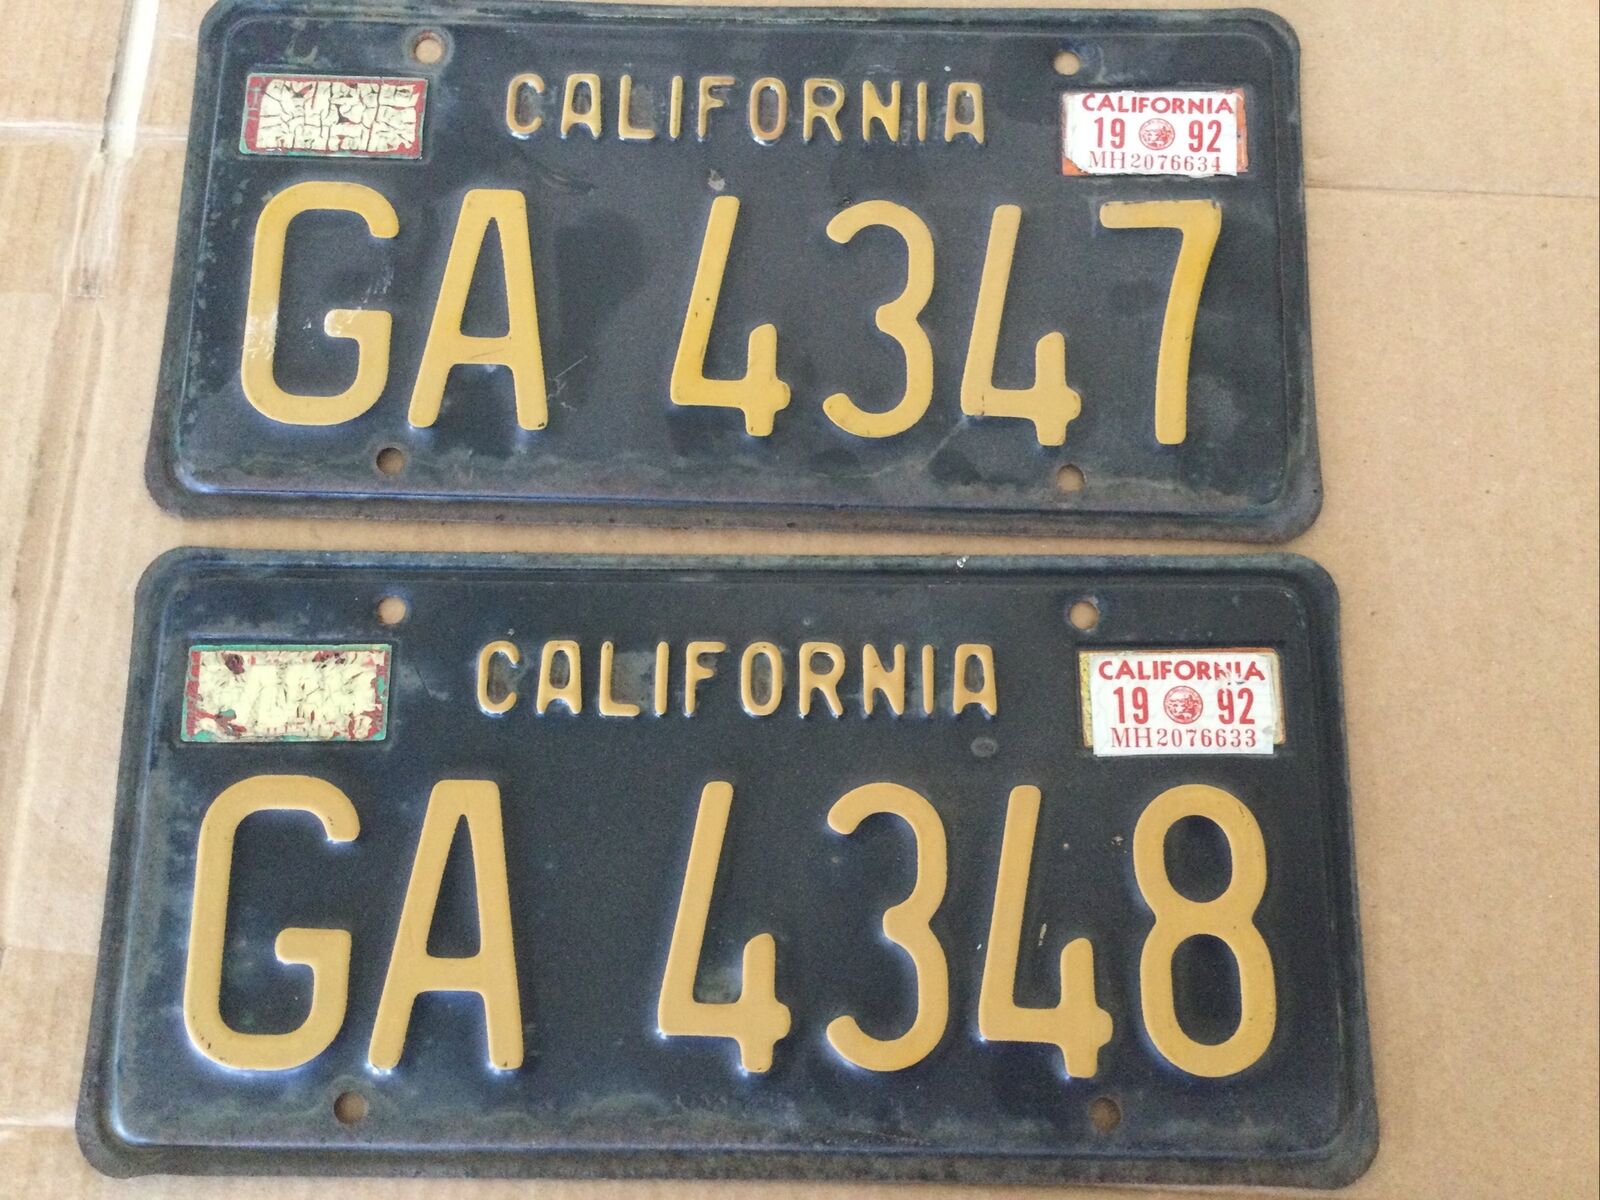 California License Plates. Expired. Not For Road Use. Black. 1963.